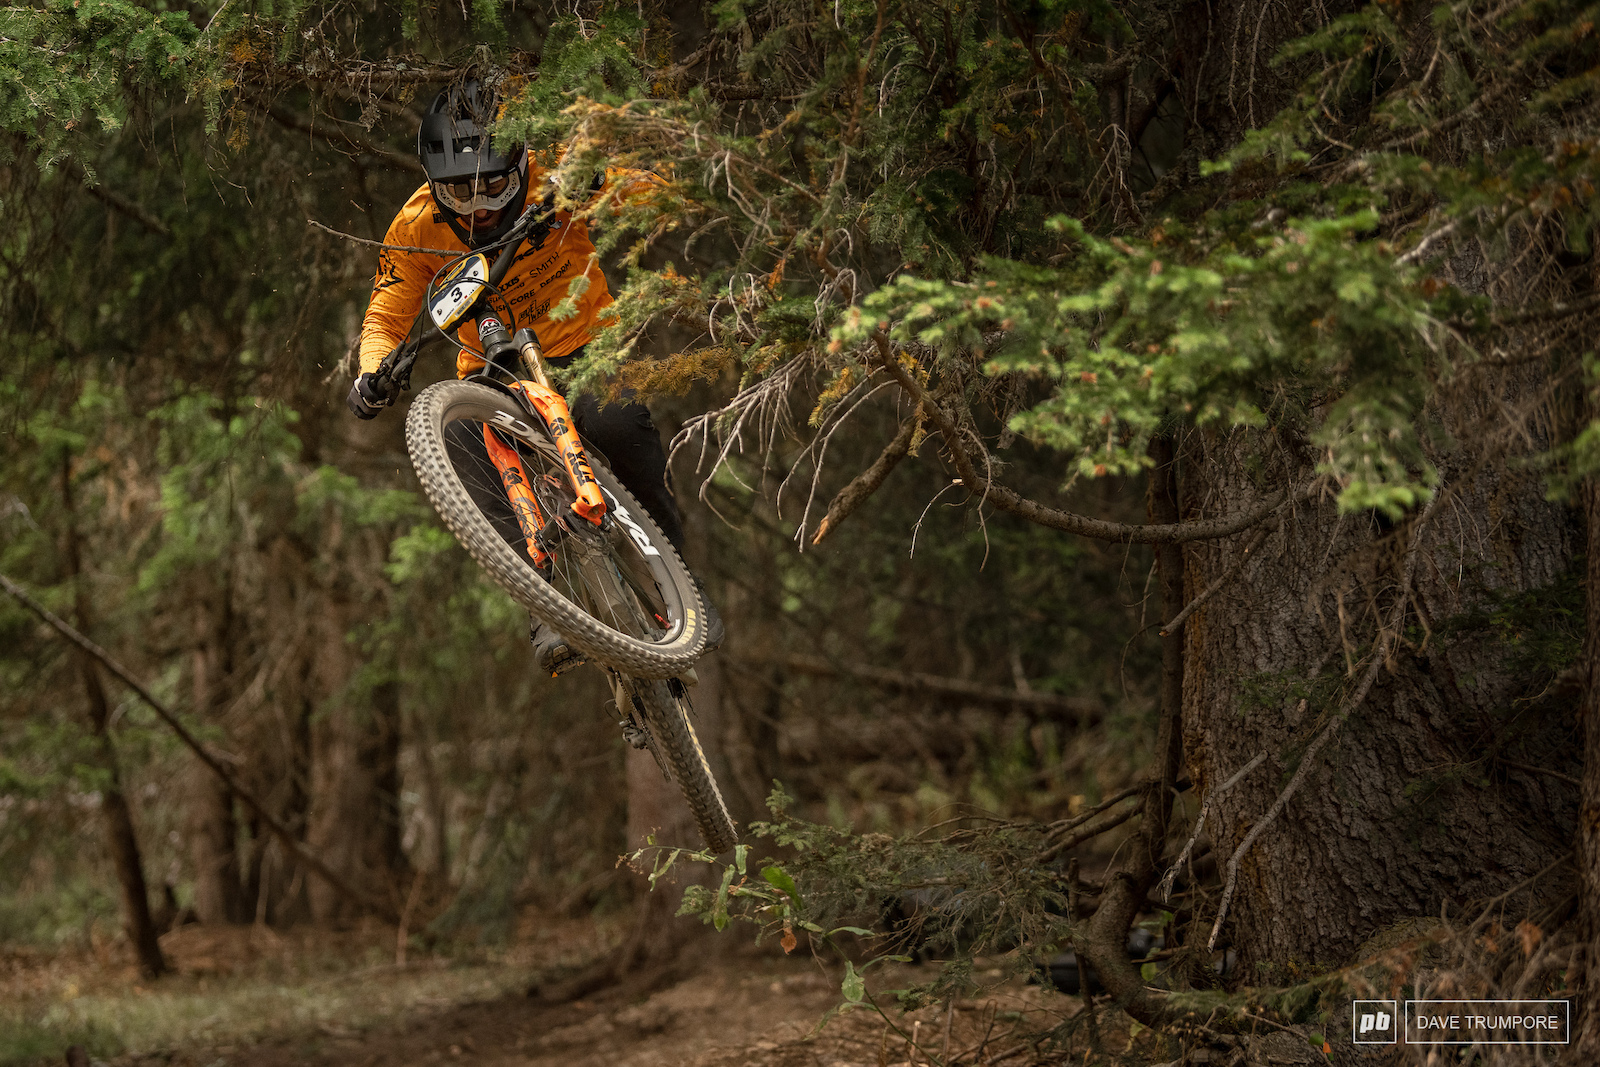 Jesse Melamed looking after leaping on a berm to berm gap.